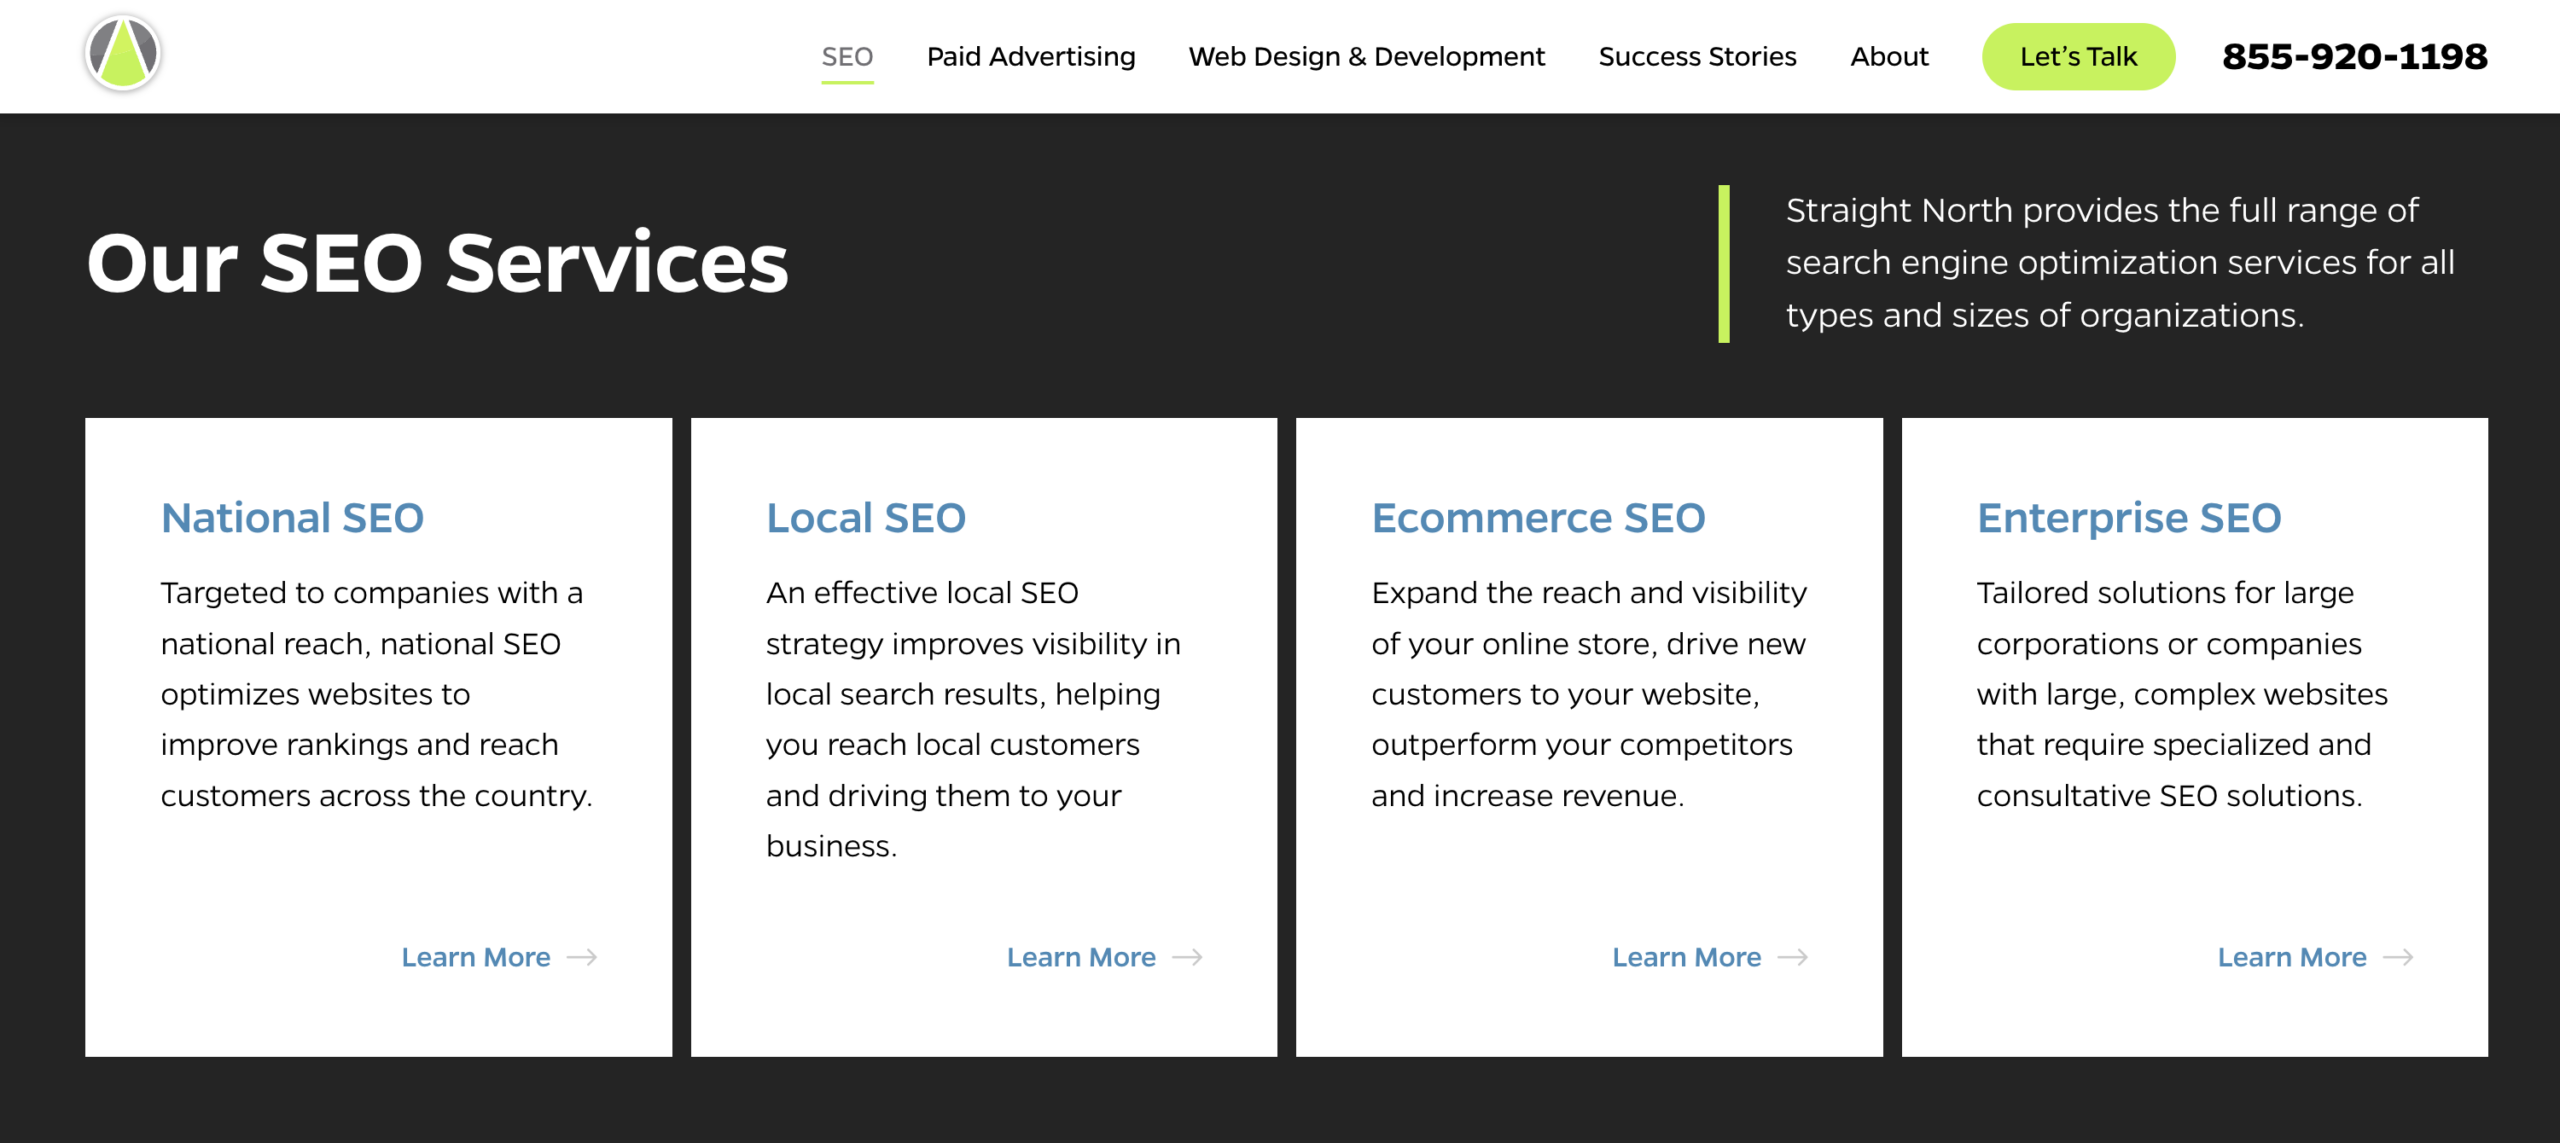 Straight North’s broad range of SEO services.